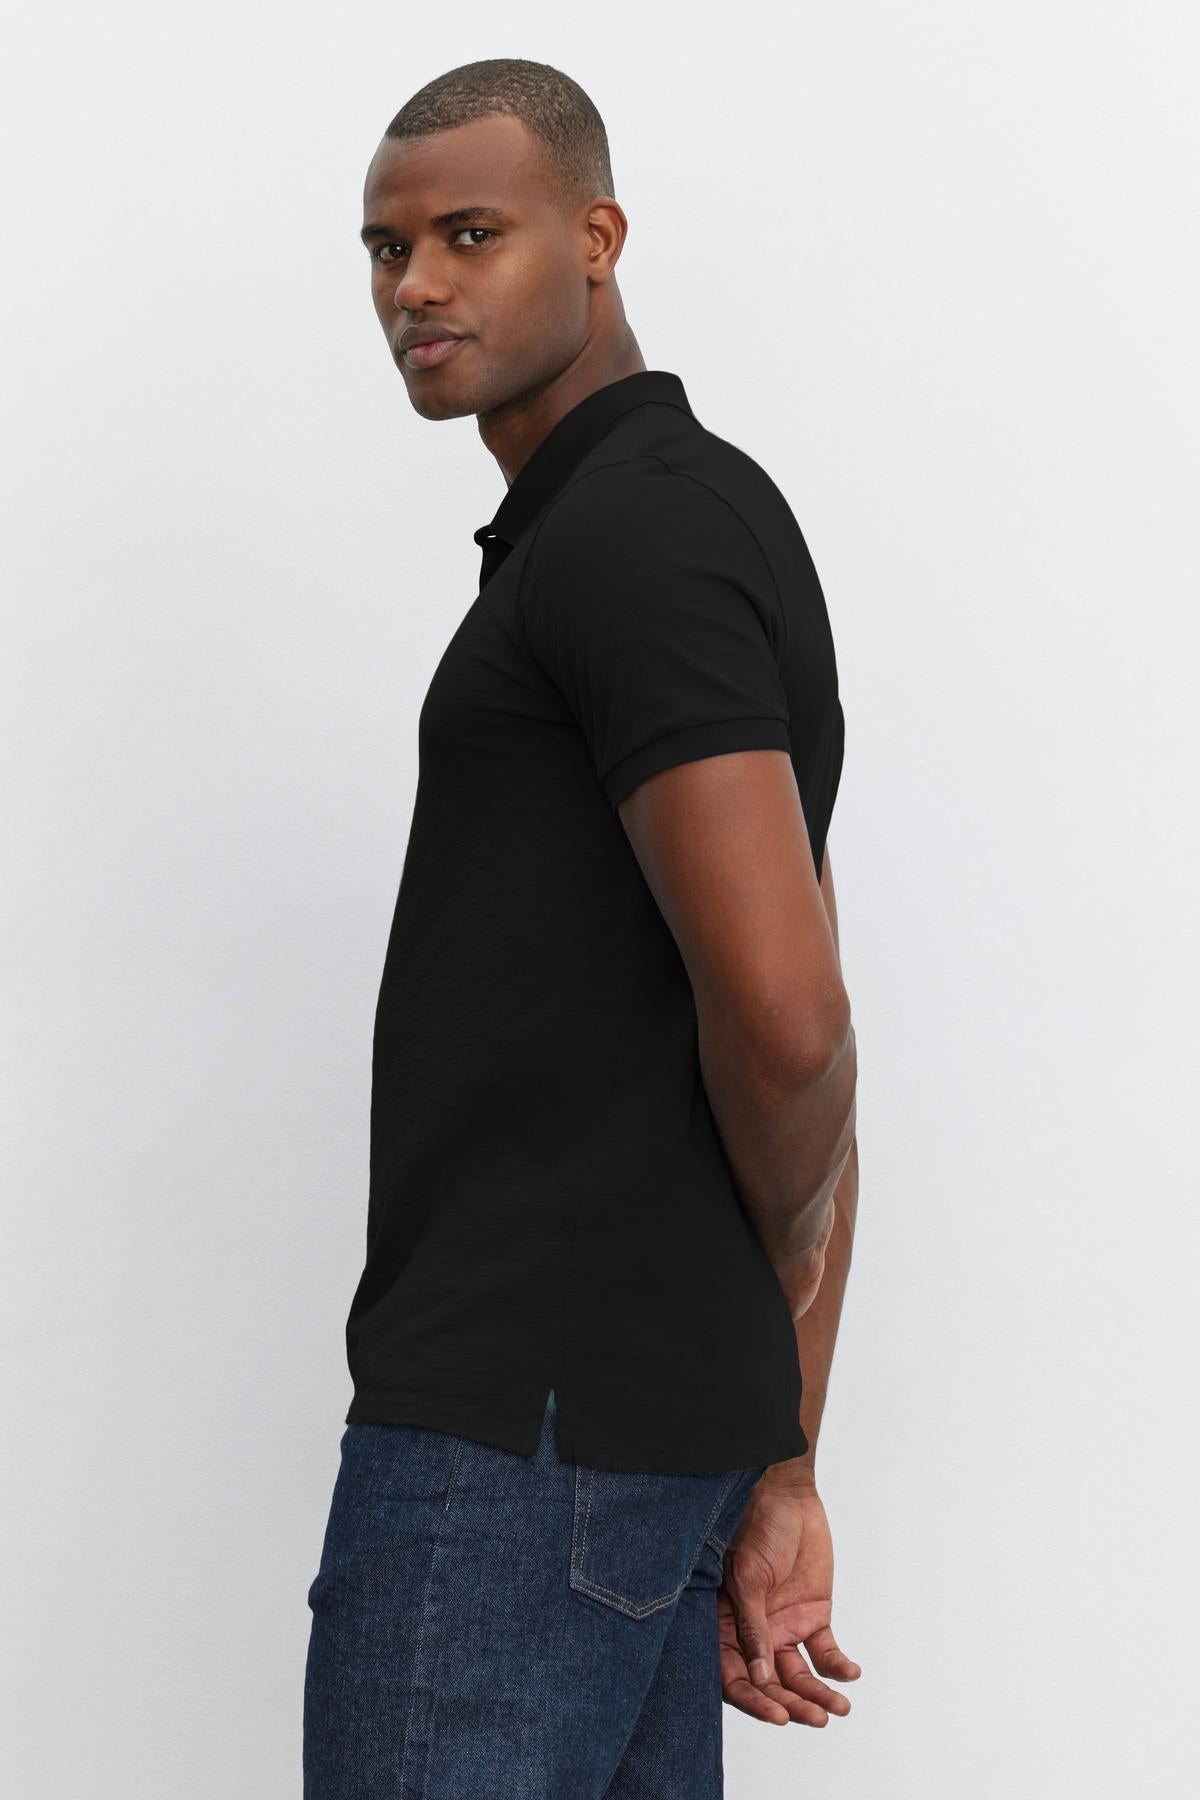 A young man in a black NIKO POLO polo shirt by Velvet by Graham & Spencer and jeans, standing sideways, looks over his shoulder.-36890752876737